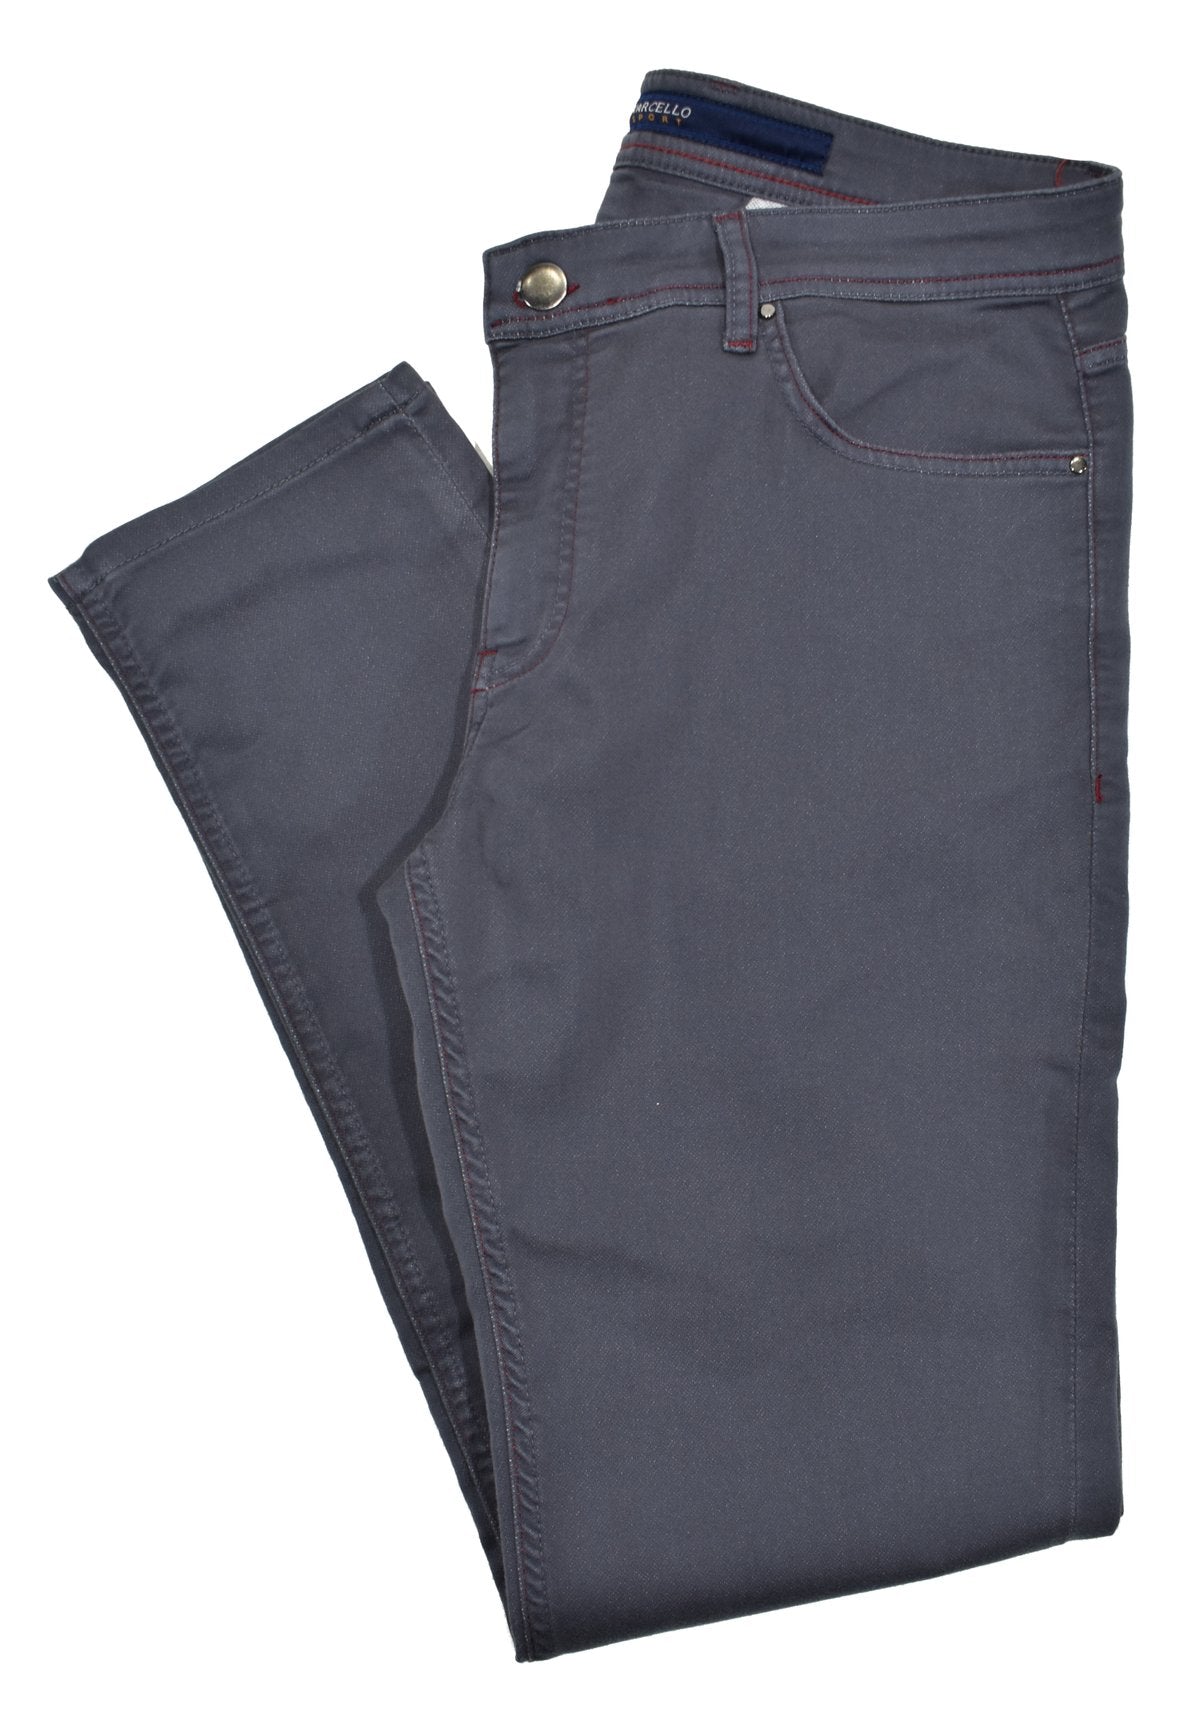 The LP23 Marcello Ultimate Comfort Stretch is a perfect traveler pant made from lightweight, soft cotton and microfiber with a stretch for added comfort. With a classic fit and a slightly tapered leg for an updated look, this 5 pocket jean model is suited to both casual and formal settings. 